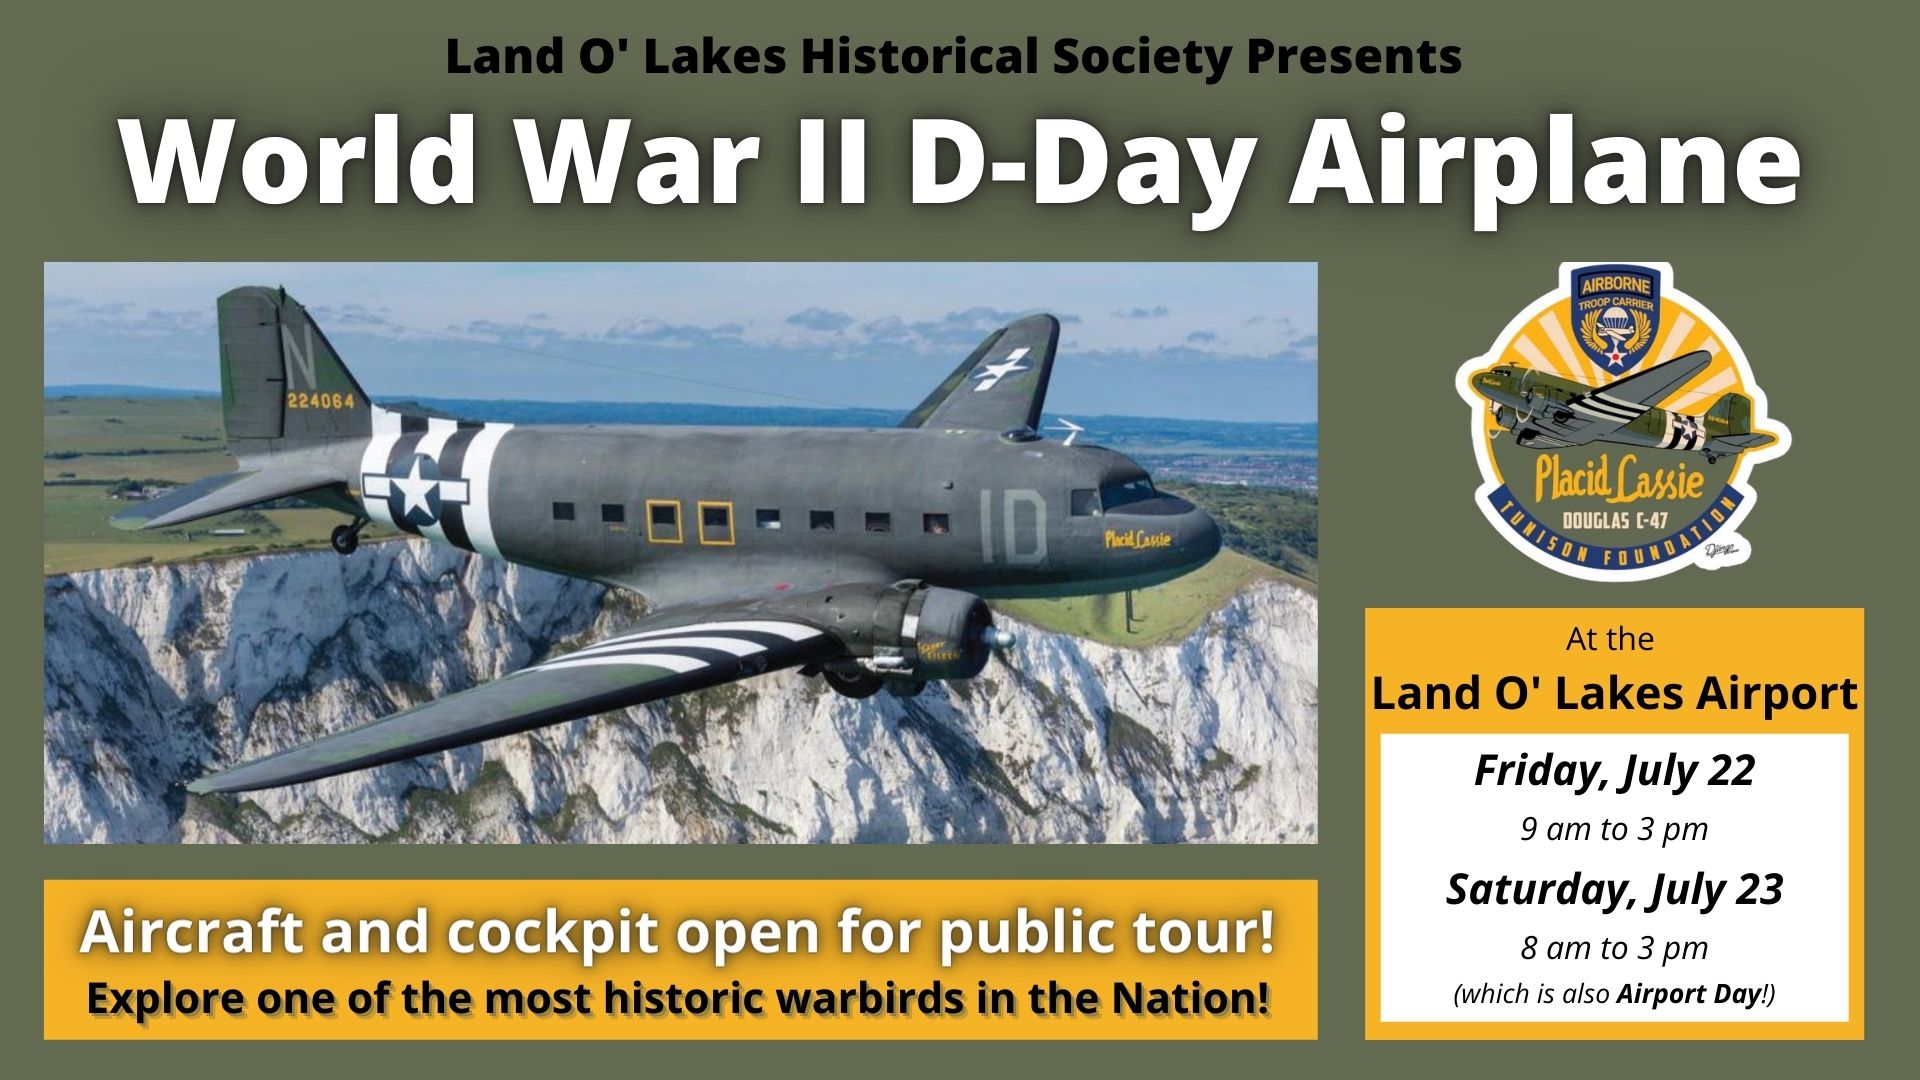 The Warbird Placid Lassie to visit Land O Lakes.